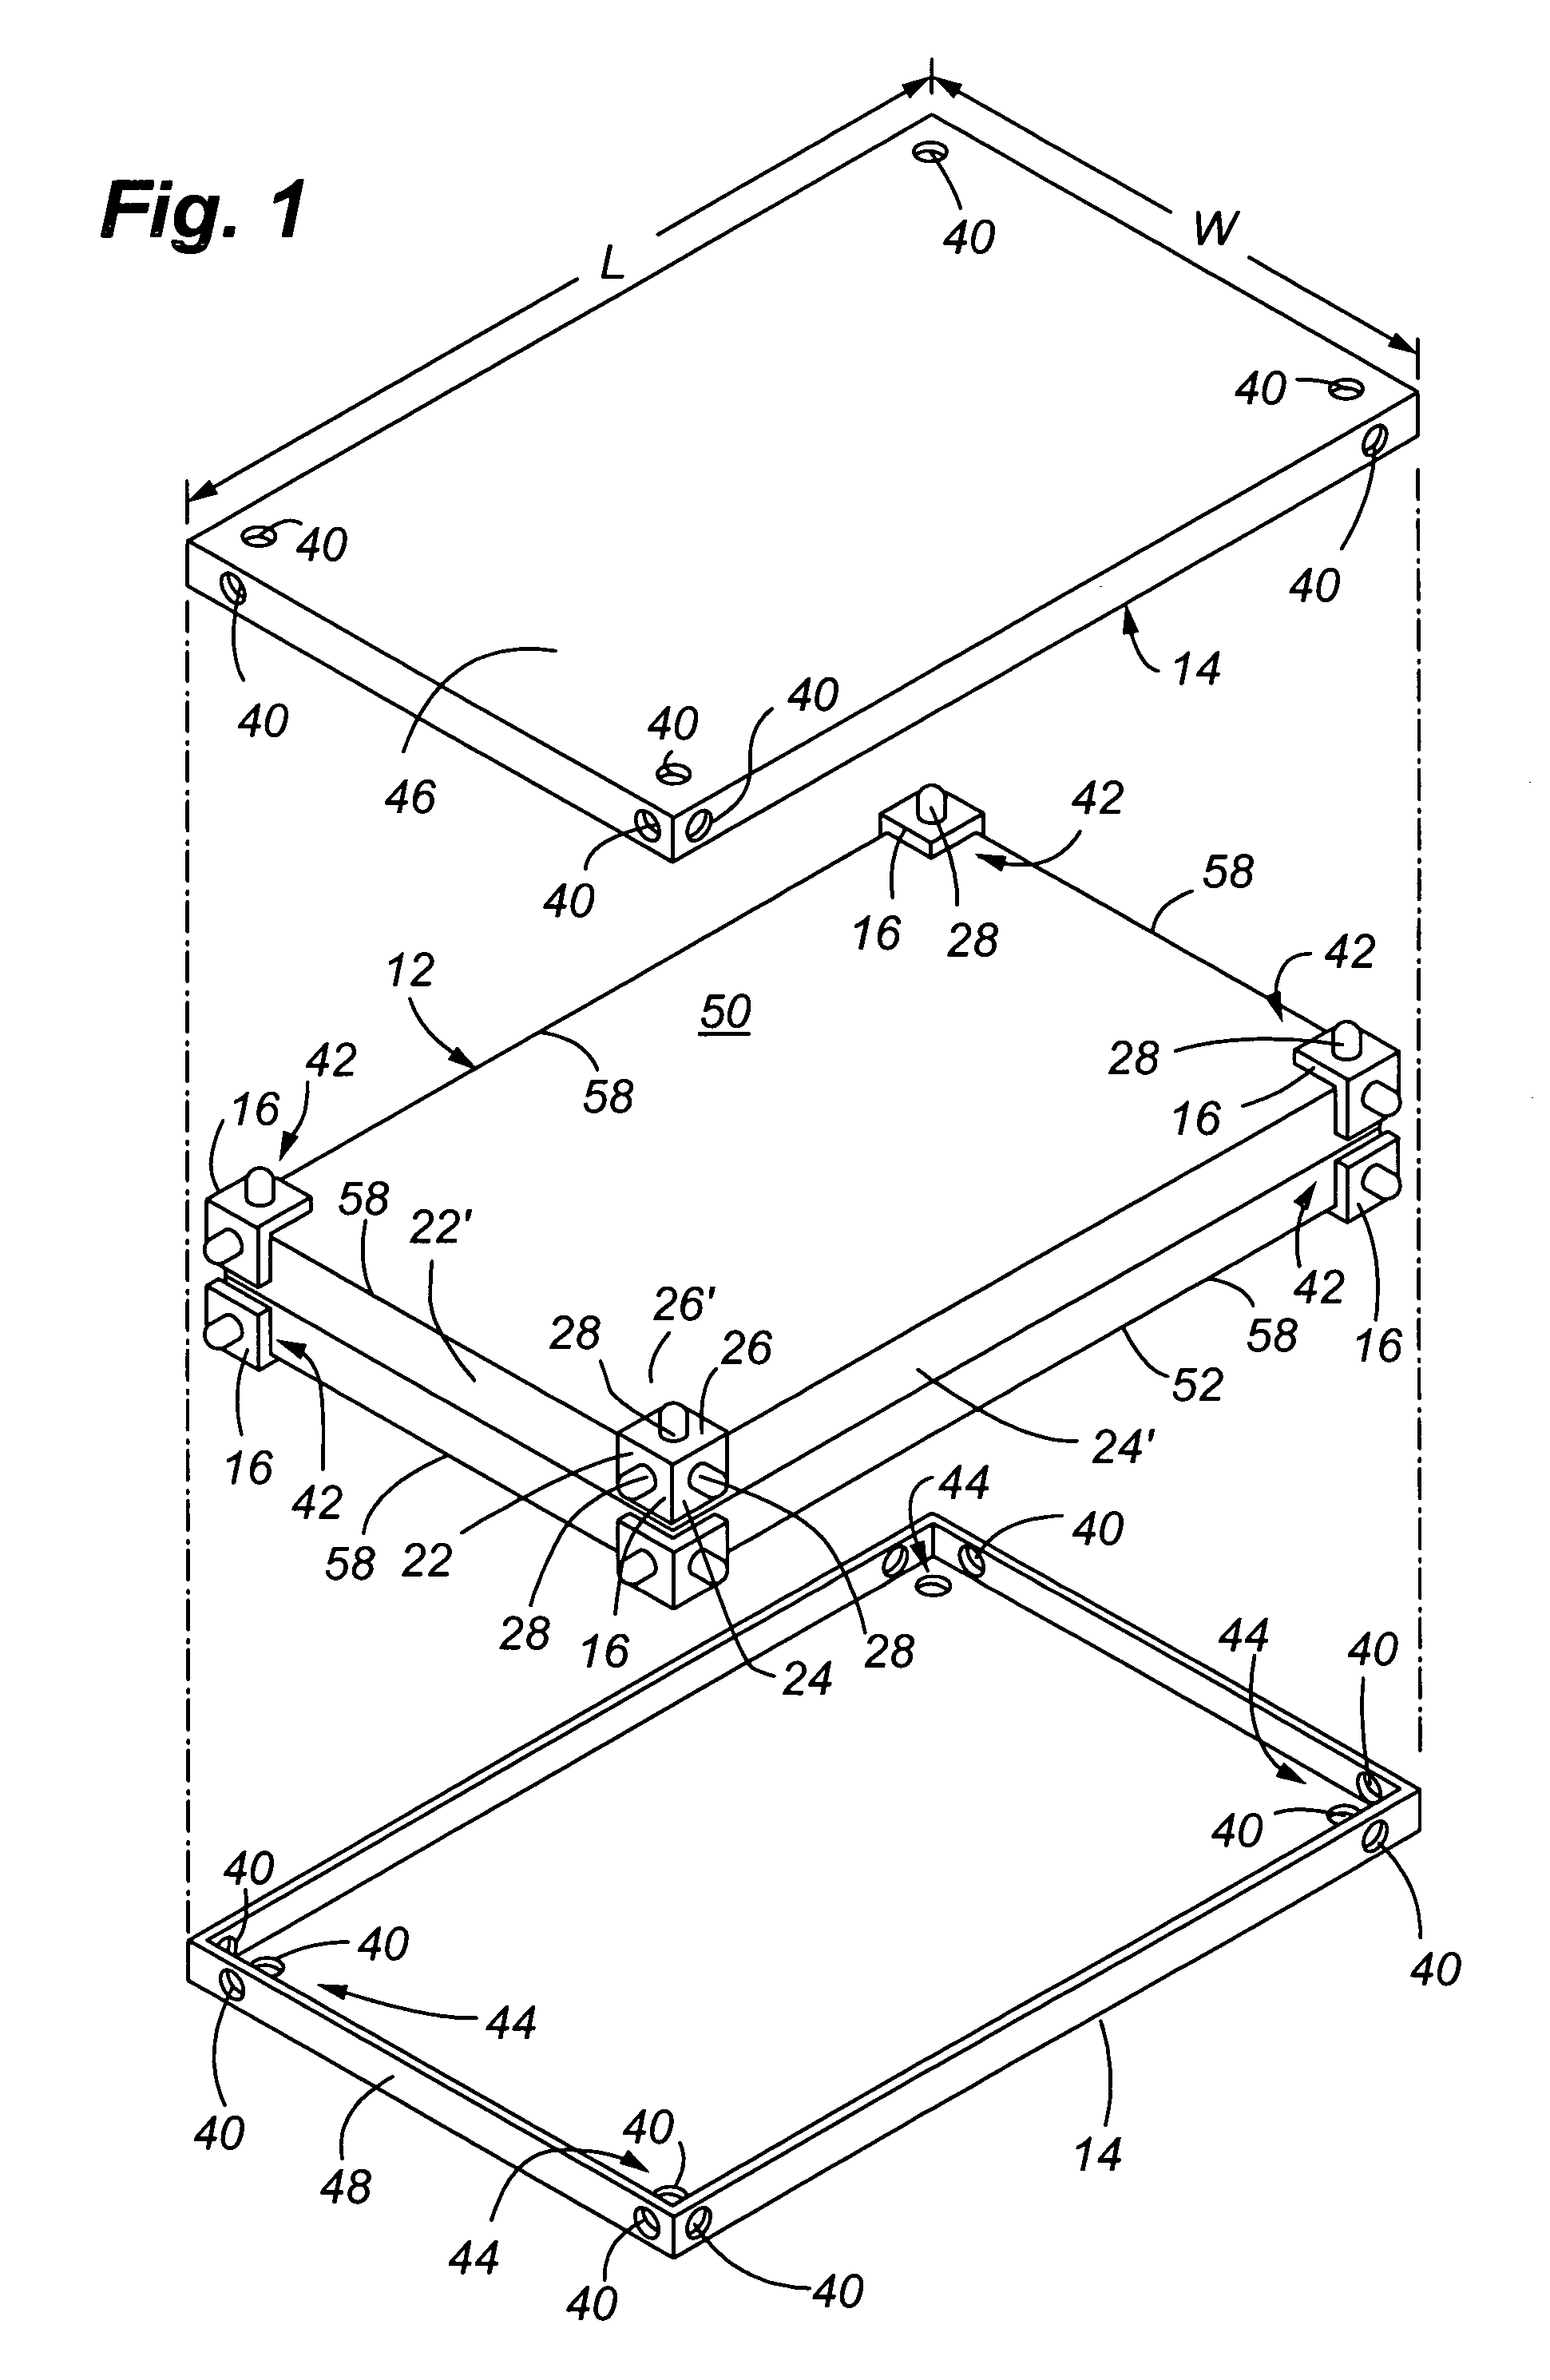 Shock protection for disk drive embedded in an enclosure